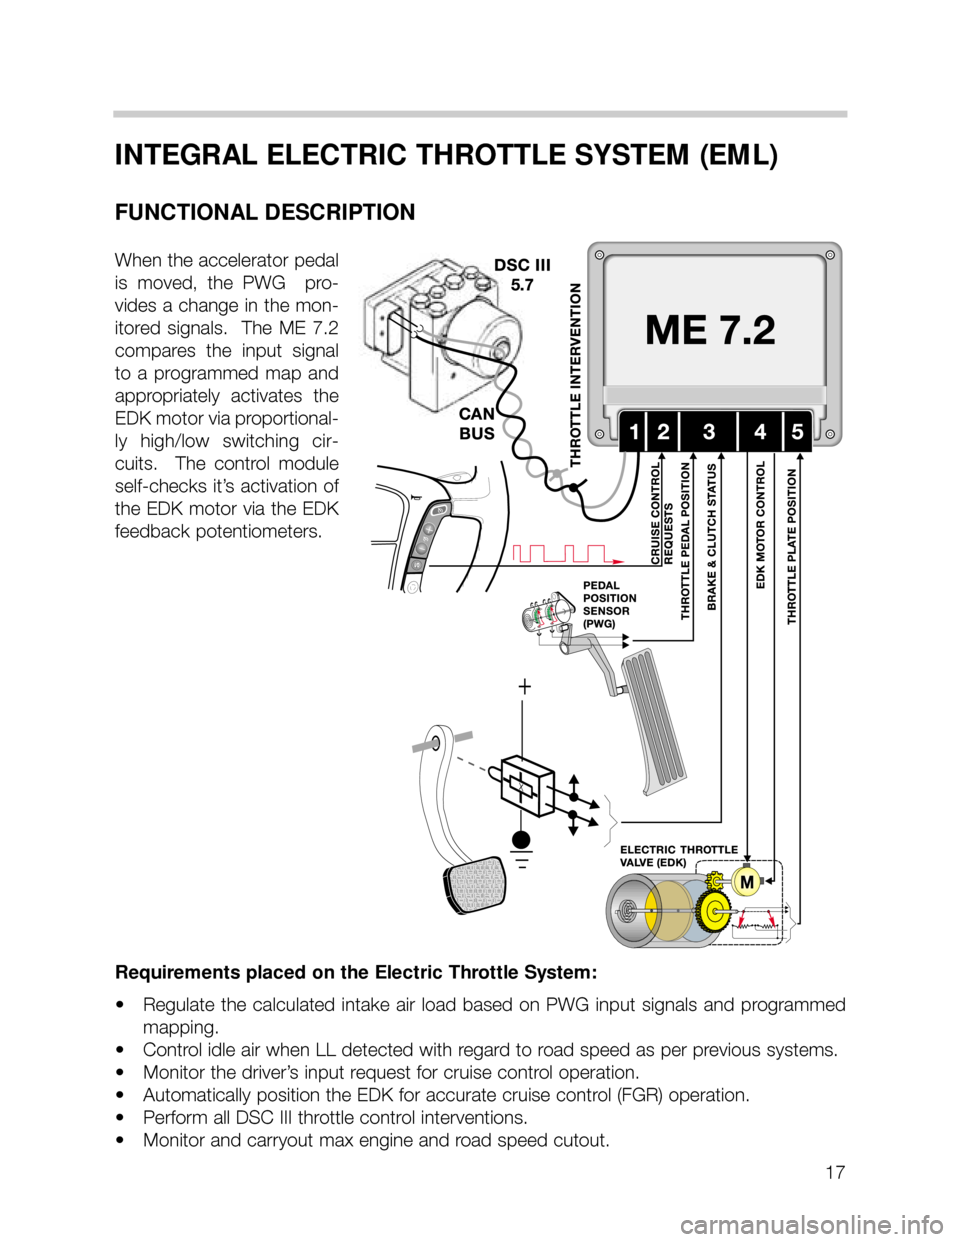 BMW X5 1999 E53 M62TU Engine User Guide 17
INTEGRAL ELECTRIC THROTTLE SYSTEM (EML)
FUNCTIONAL DESCRIPTION
When the accelerator pedal
is  moved,  the  PWG    pro-
vides a change in the mon-
itored  signals.    The  ME  7.2
compares  the  inp